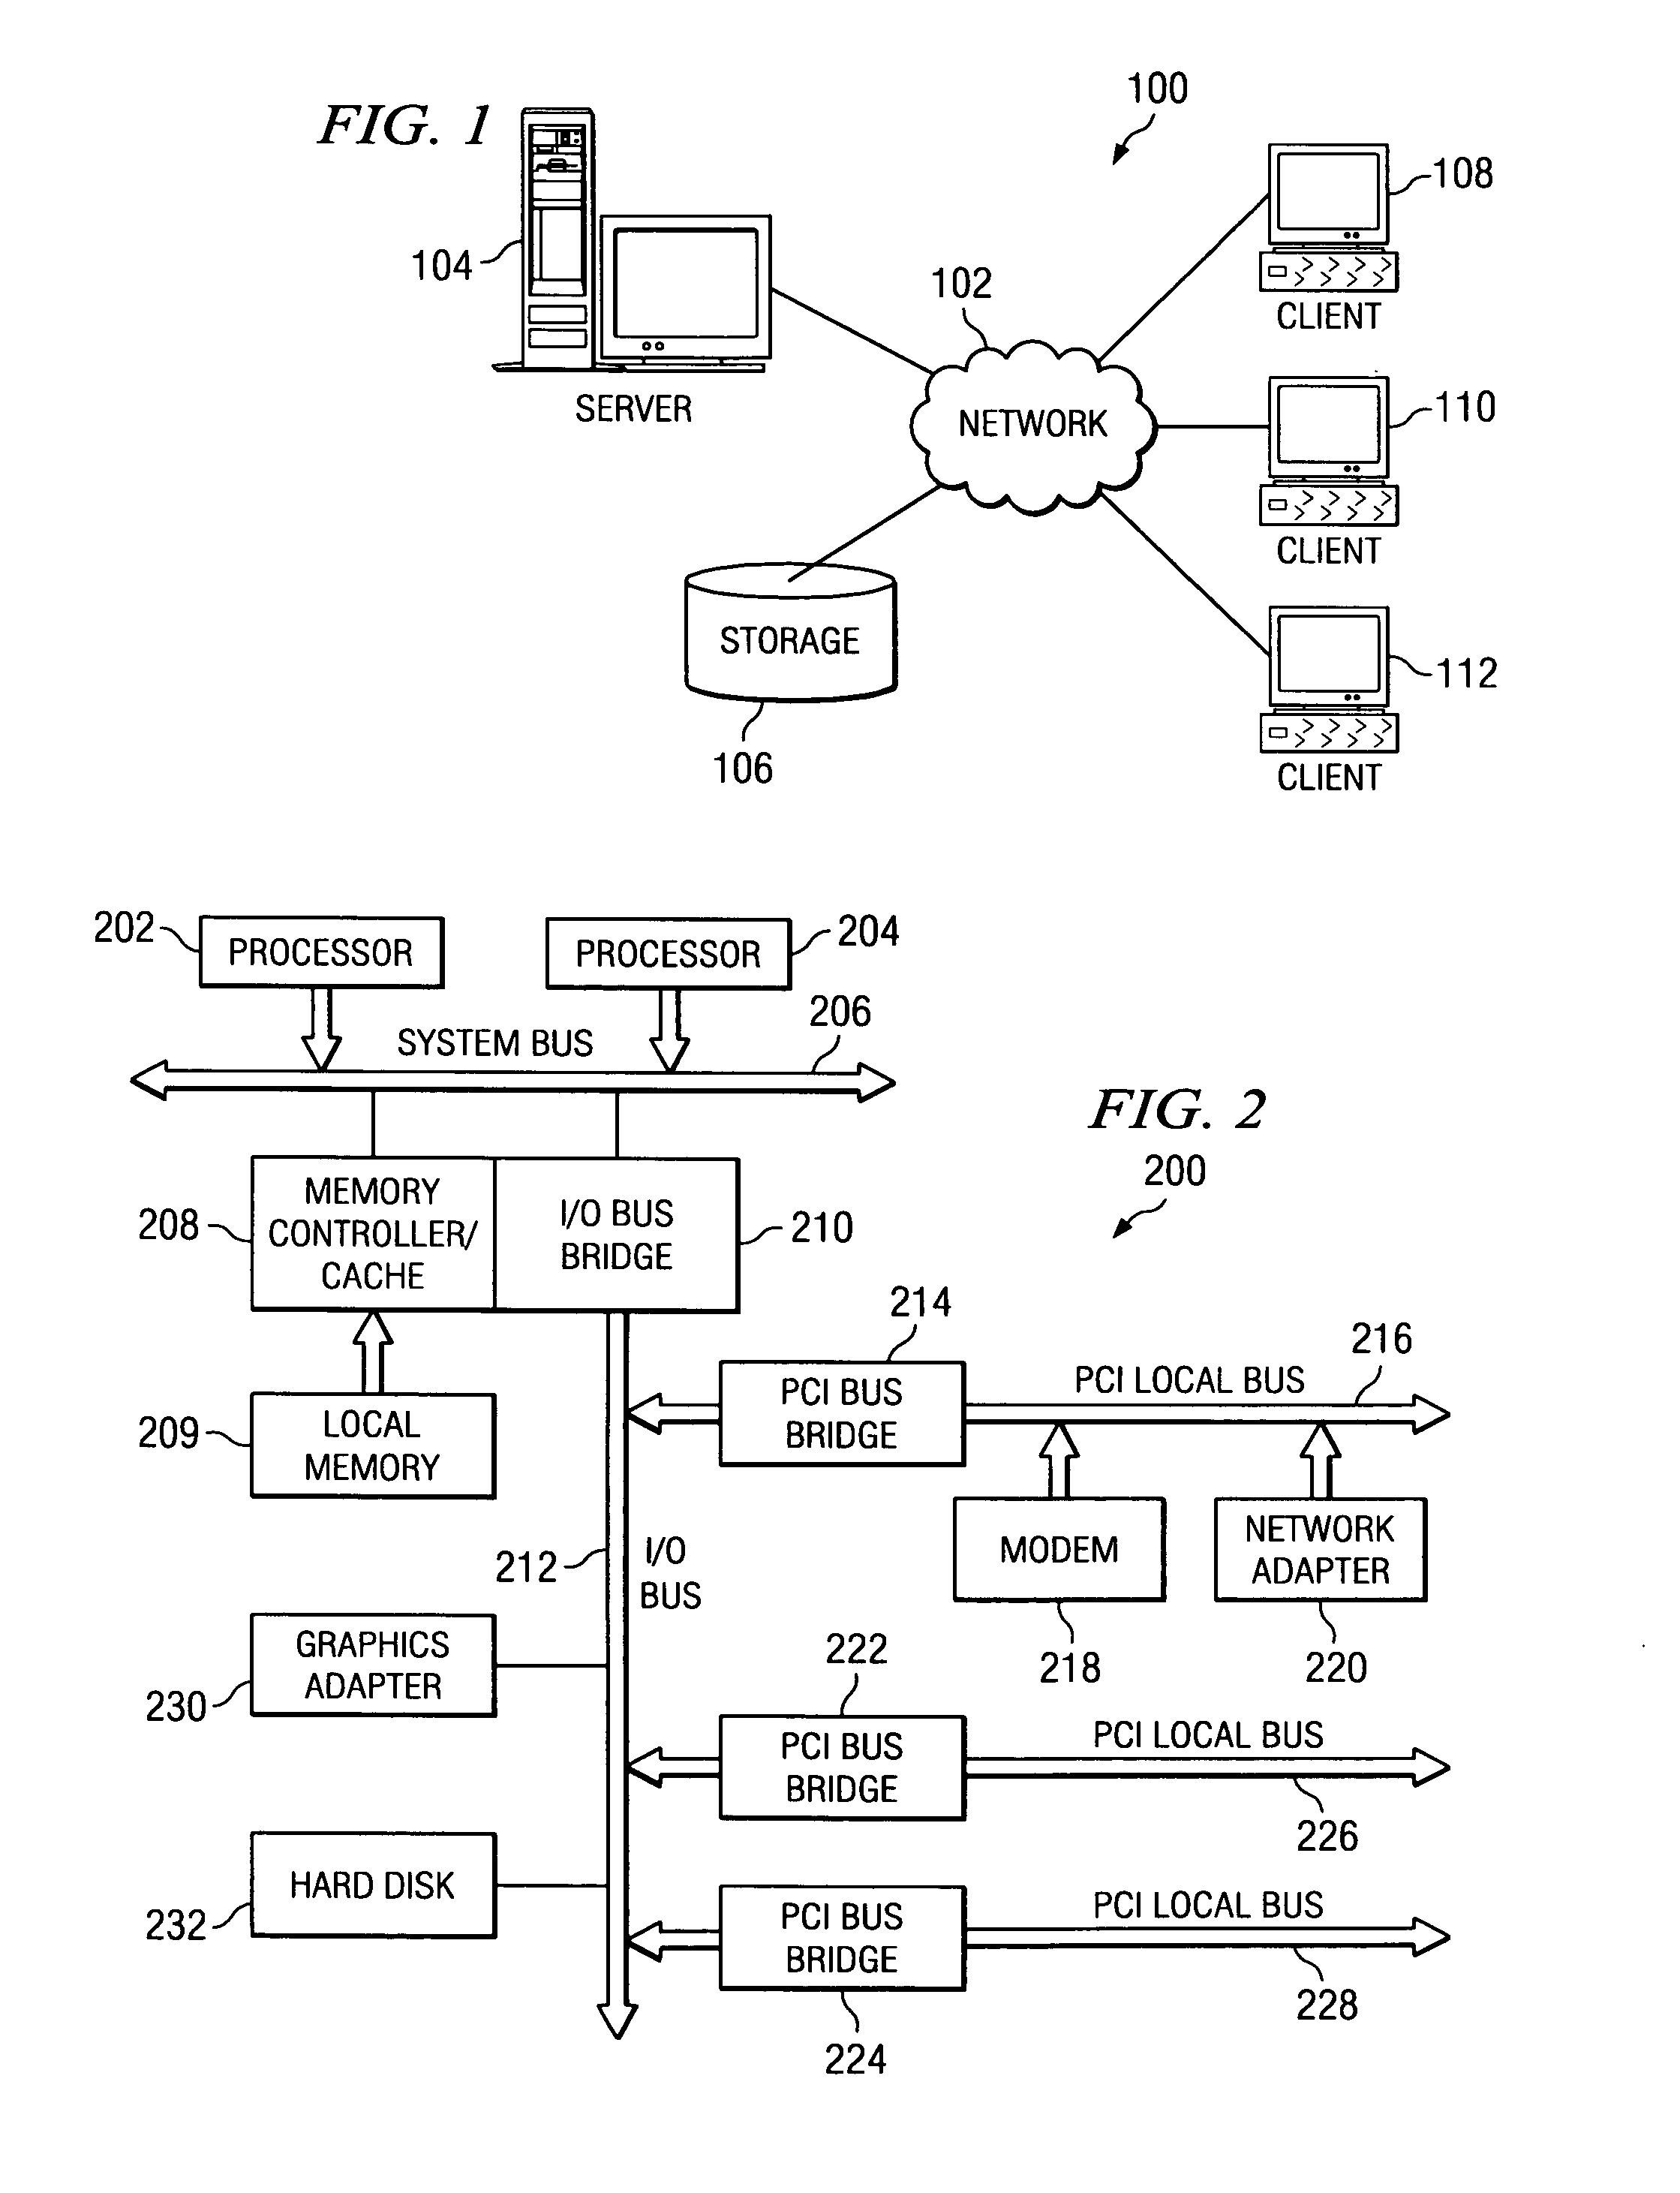 Method and apparatus for solutions deployment in a heterogeneous systems management environment